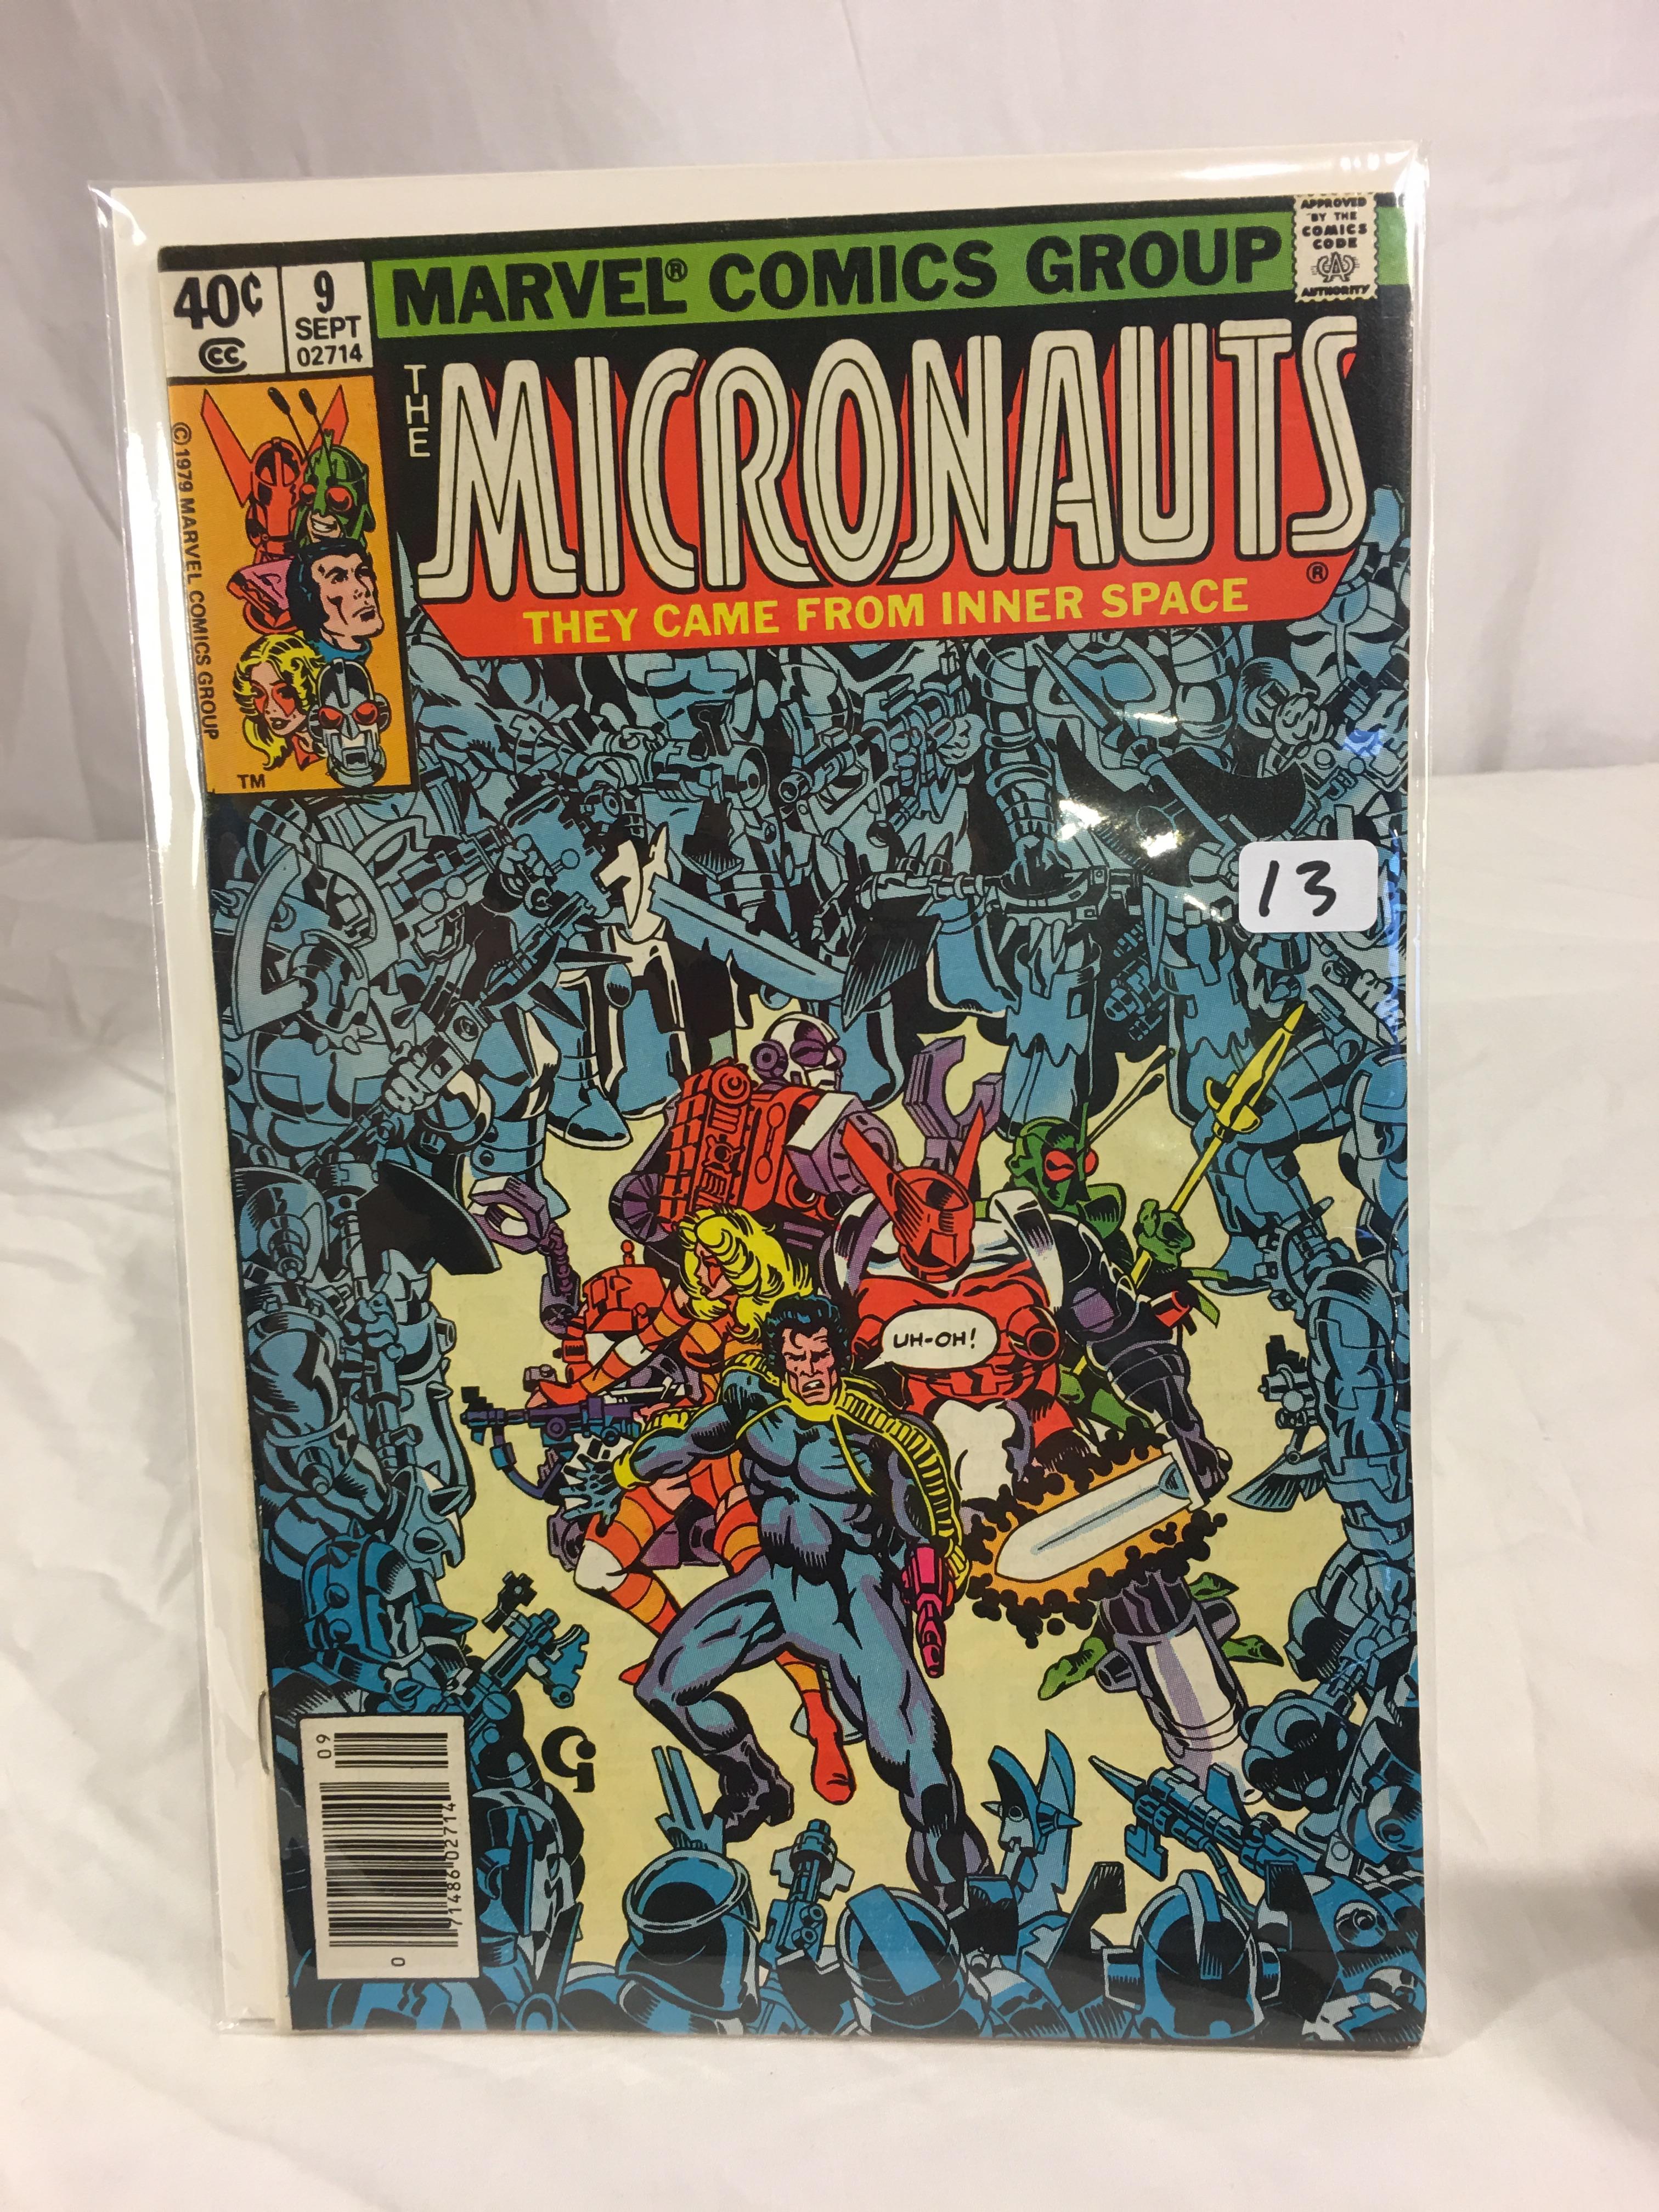 Collector Vintage Marvel Comics They Cane From Inner Space Micronauts Comic Book #9